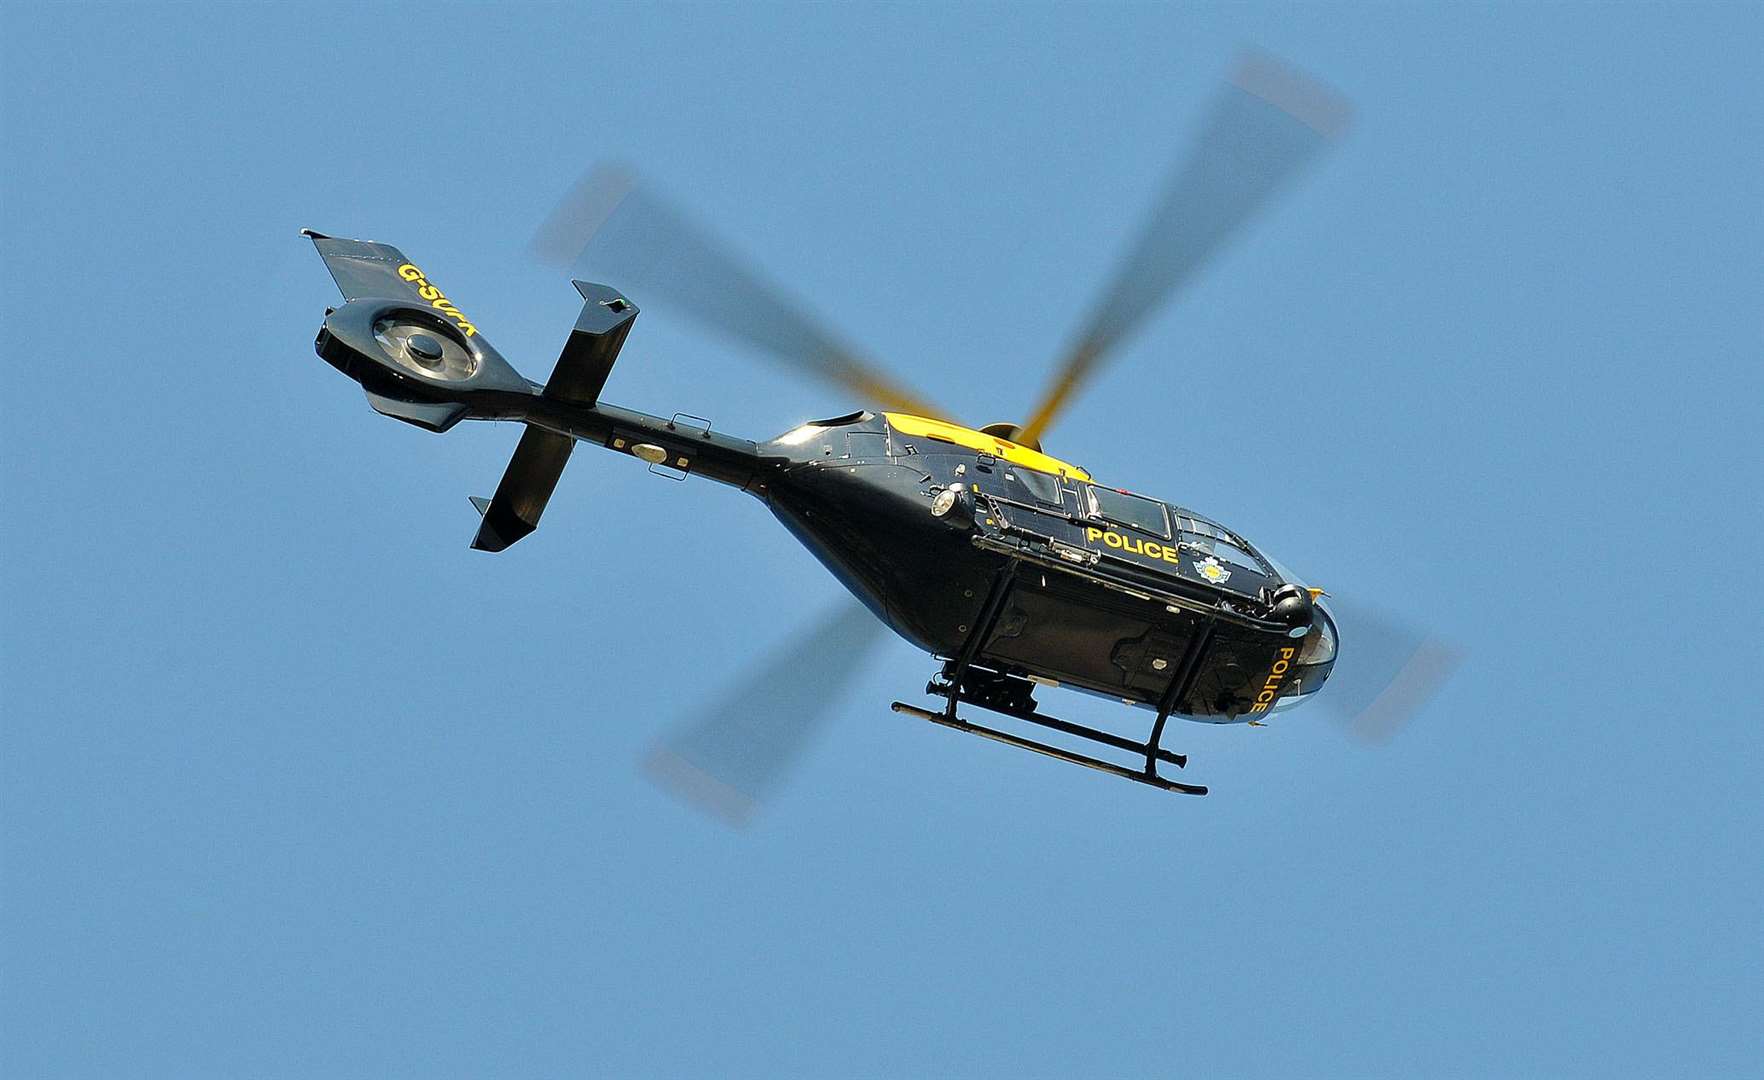 The police helicopter was seen above the Medway Bridge. Stock image